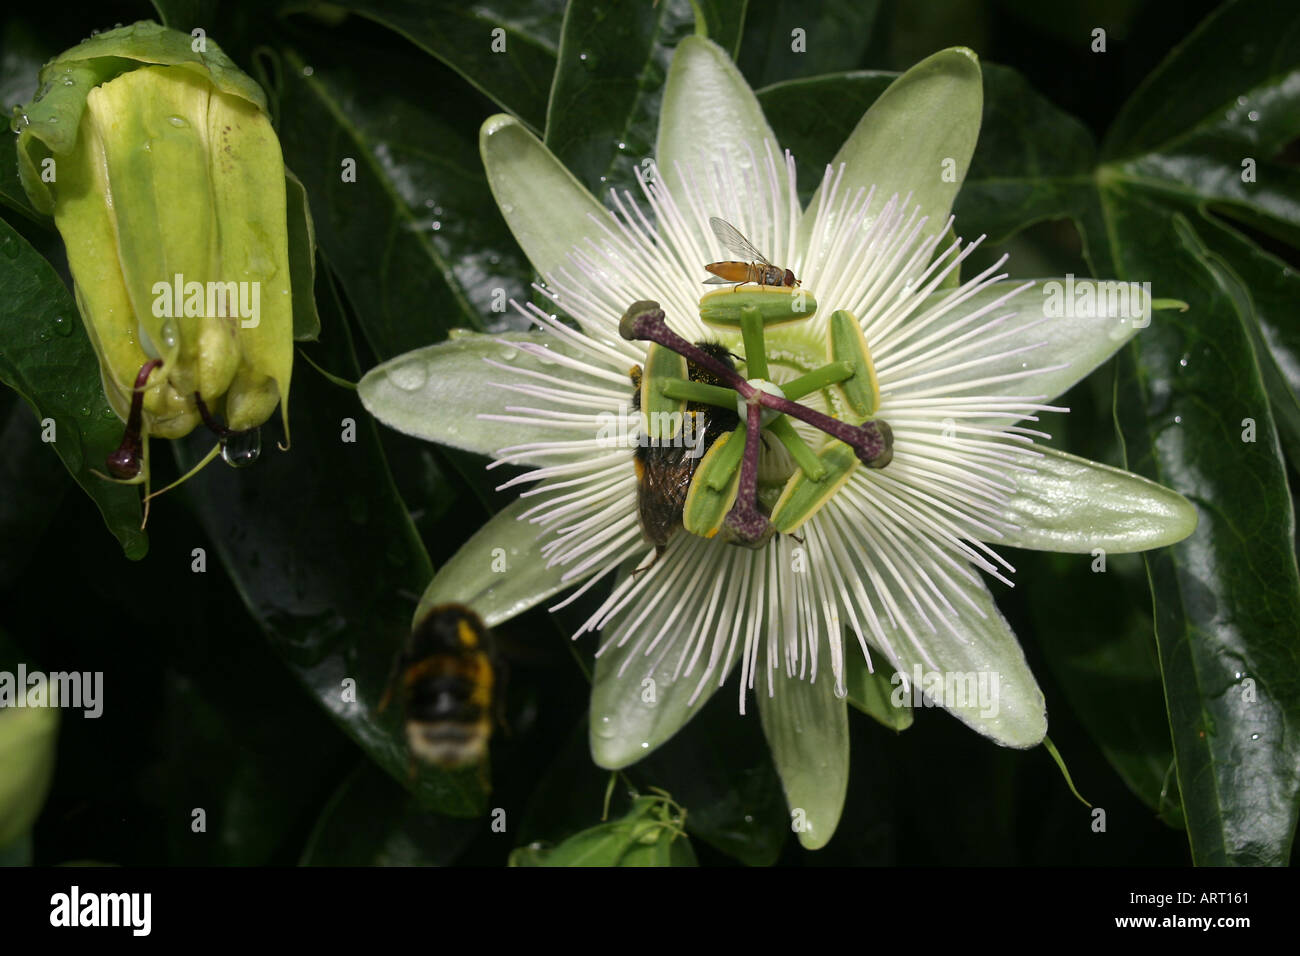 Passiflora caerulea, Passion flower, blue passion flower, common passionflower. fast growing evergreen or semi evergreen, woody stemmed tendril climber. White flowers with purple banded crowns Stock Photo